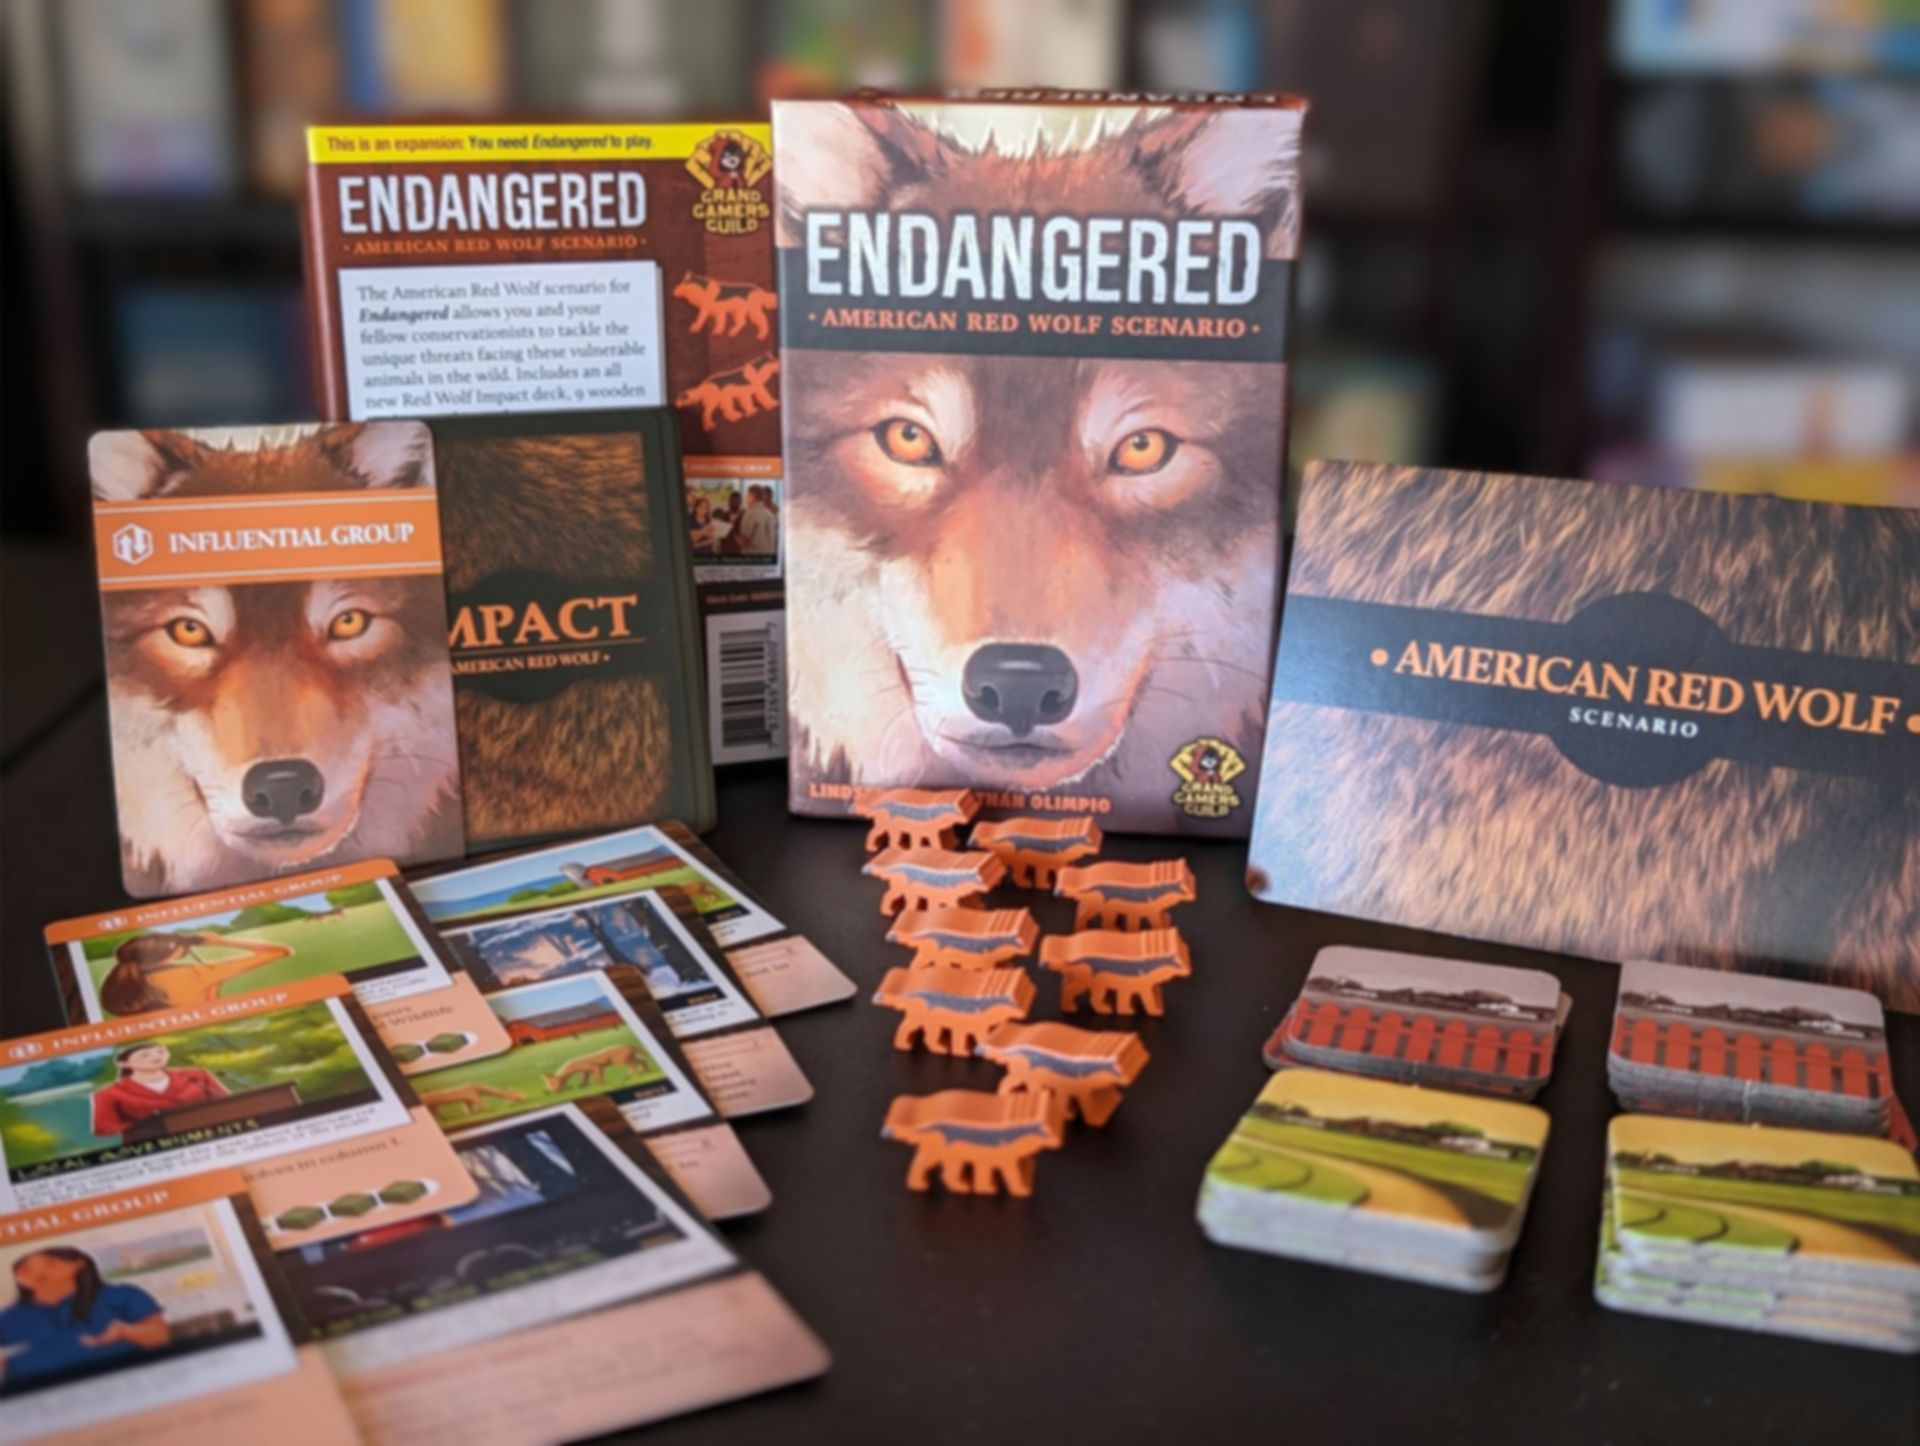 Endangered: American Red Wolf Scenario components